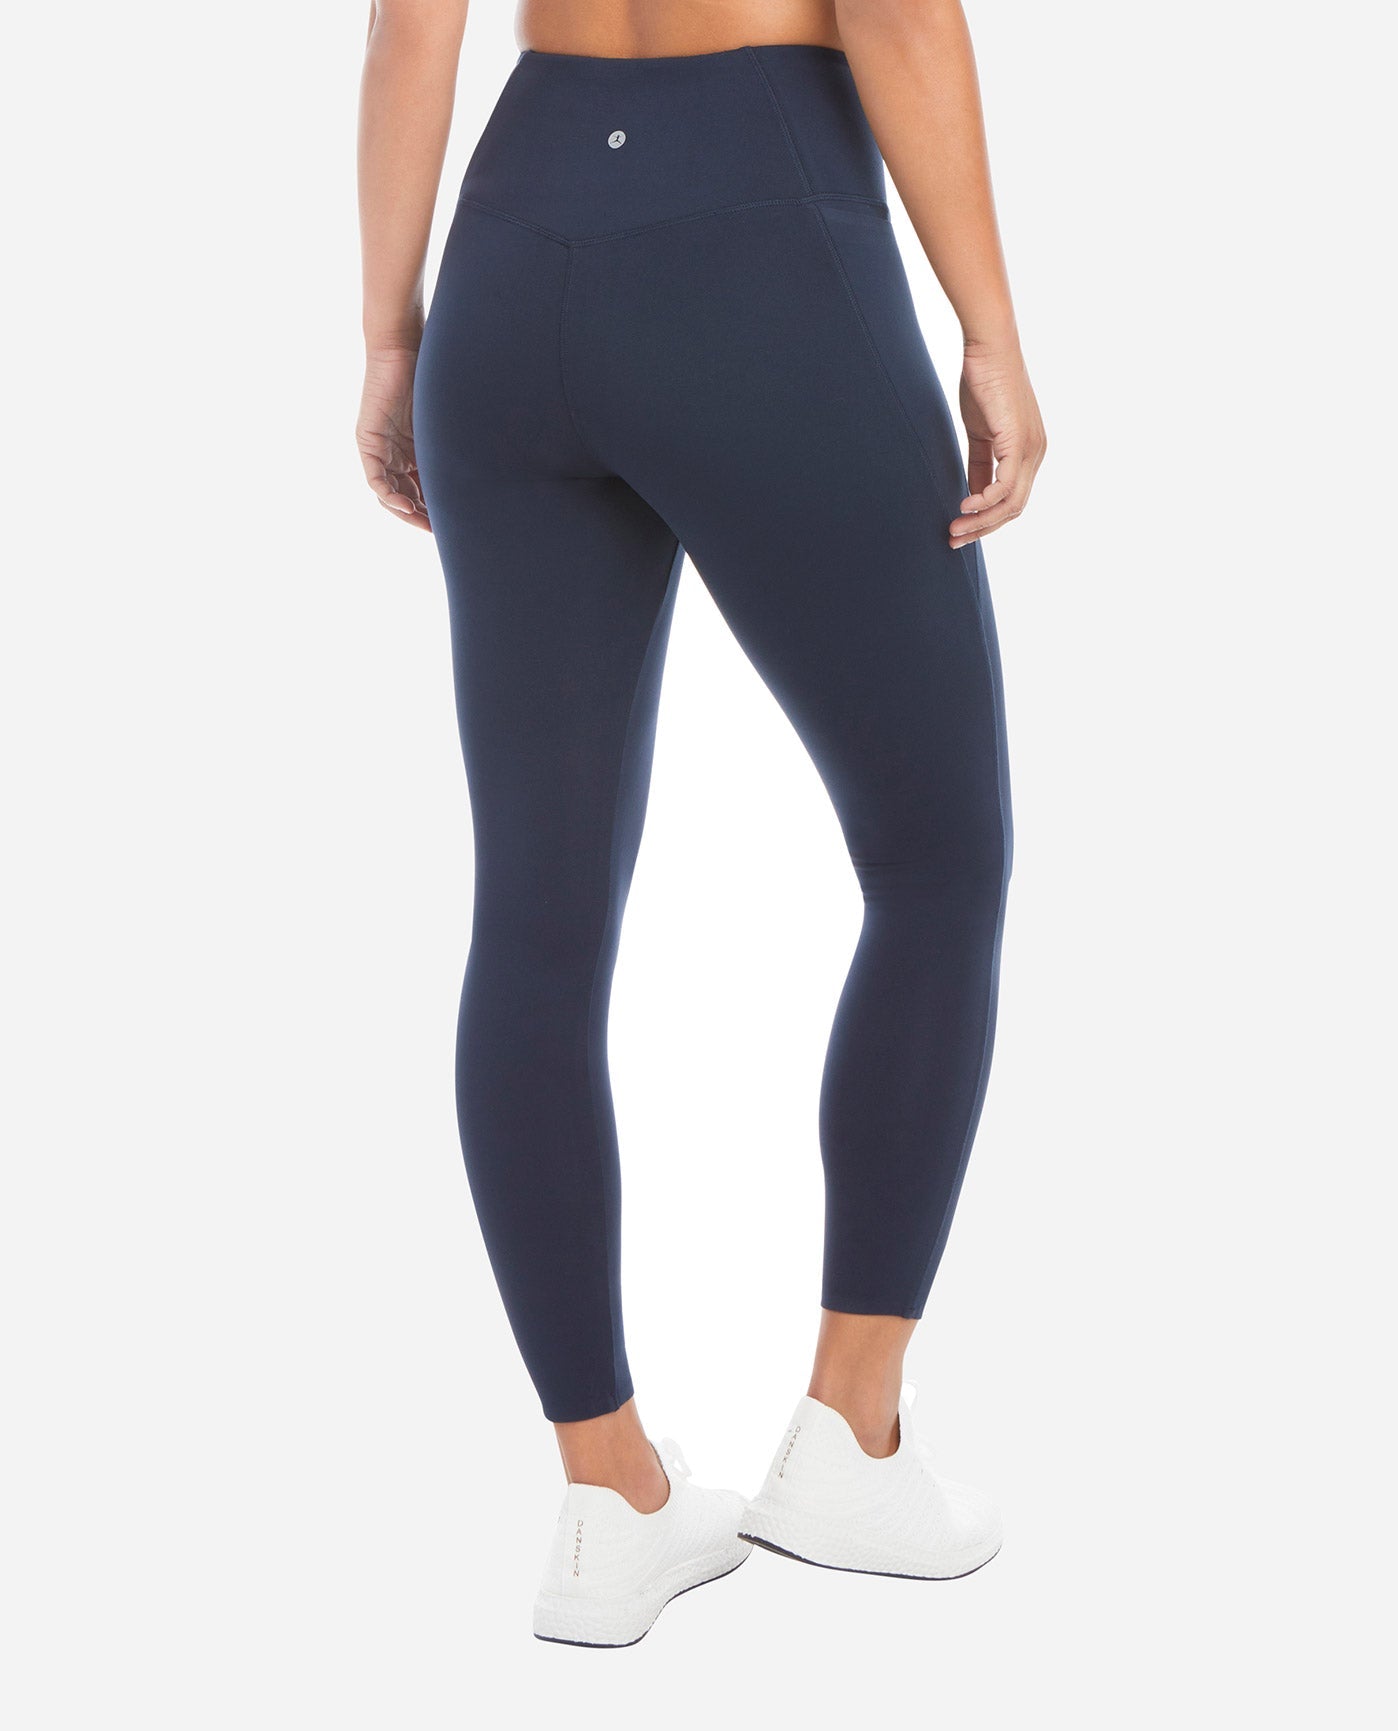 Women's High Rise 7/8 Bonded Legging with Side Pockets